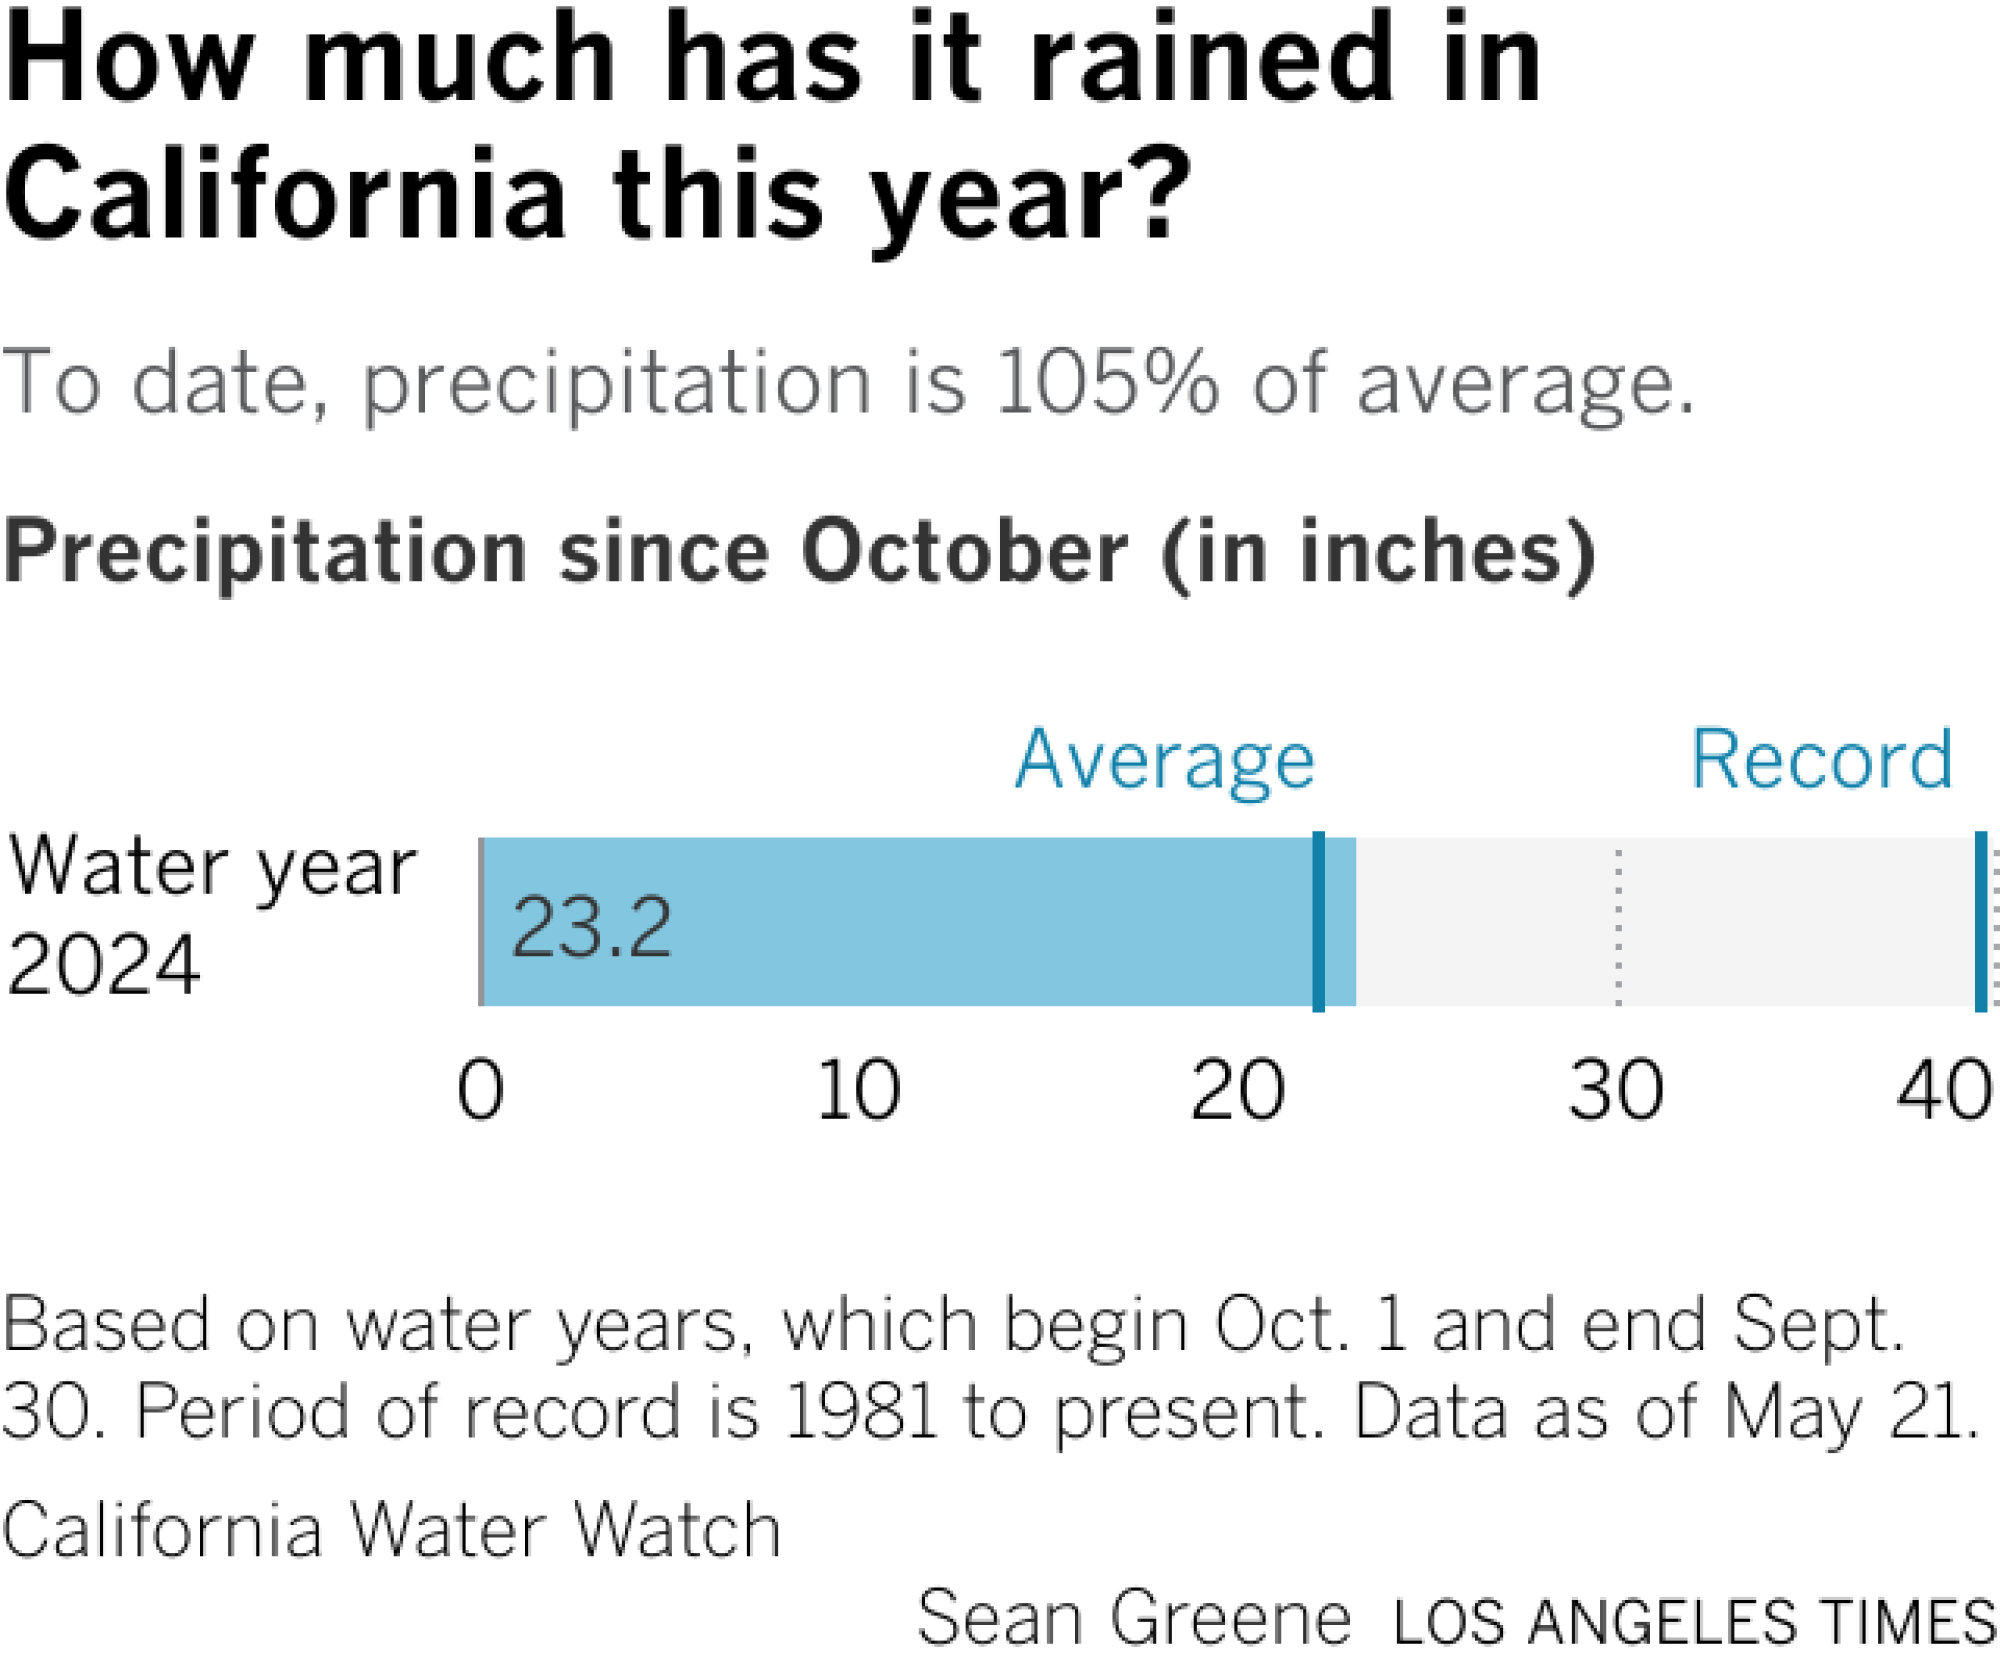 California has received 23.2 inches of rain so far this year, compared with an historical average of 22.2.